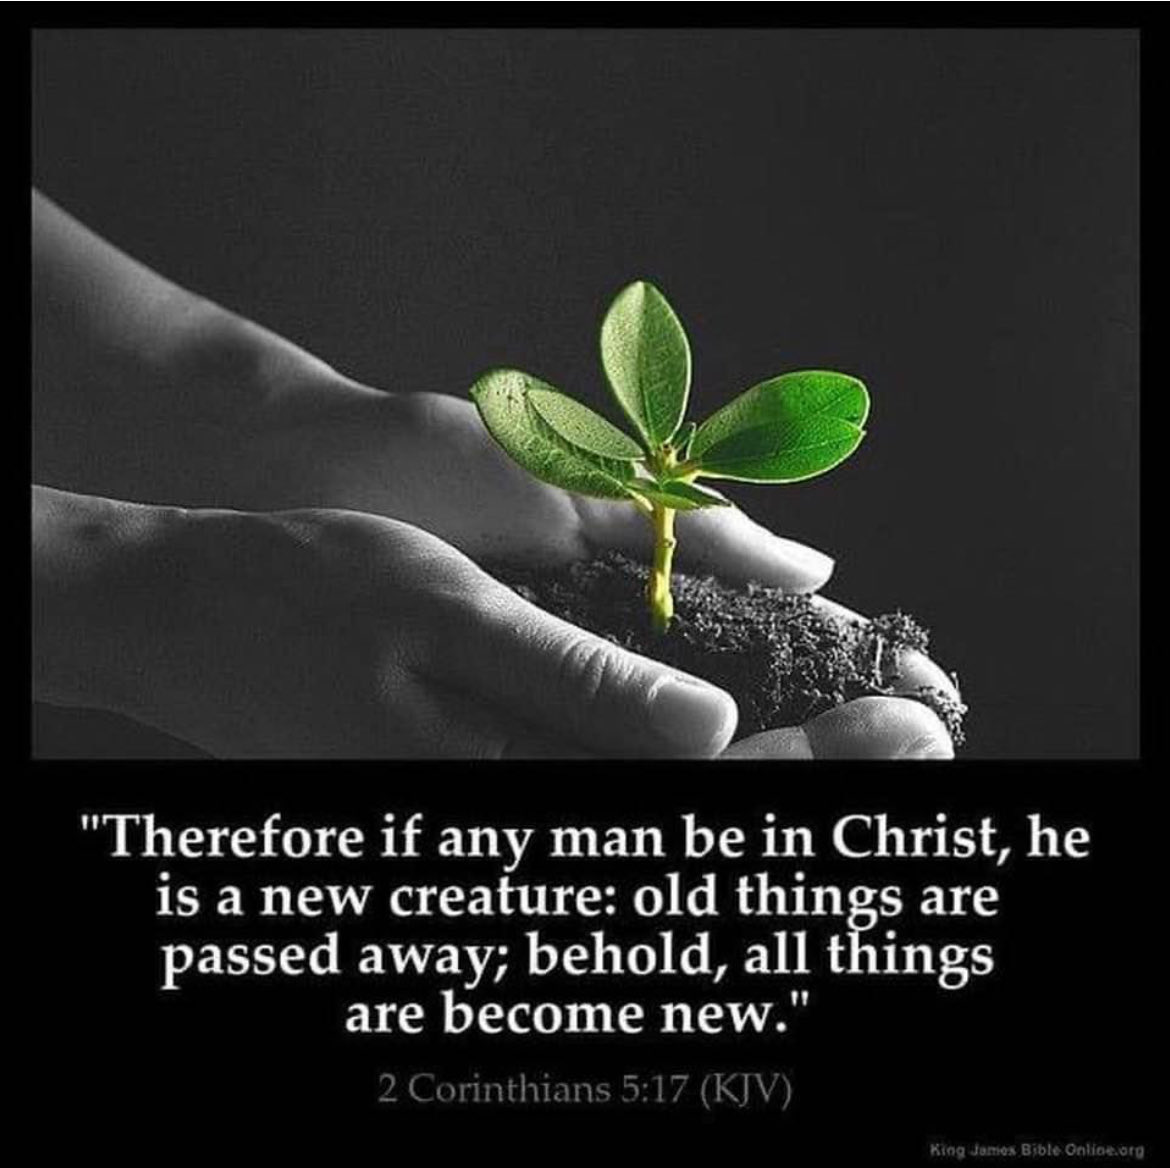 17 Therefore if any man be in Christ, he is a new creature: old things are passed away; behold, all things are become new. 2 Corinthians 5:17 Have a blessed day everyone. ❤️🙏🏼